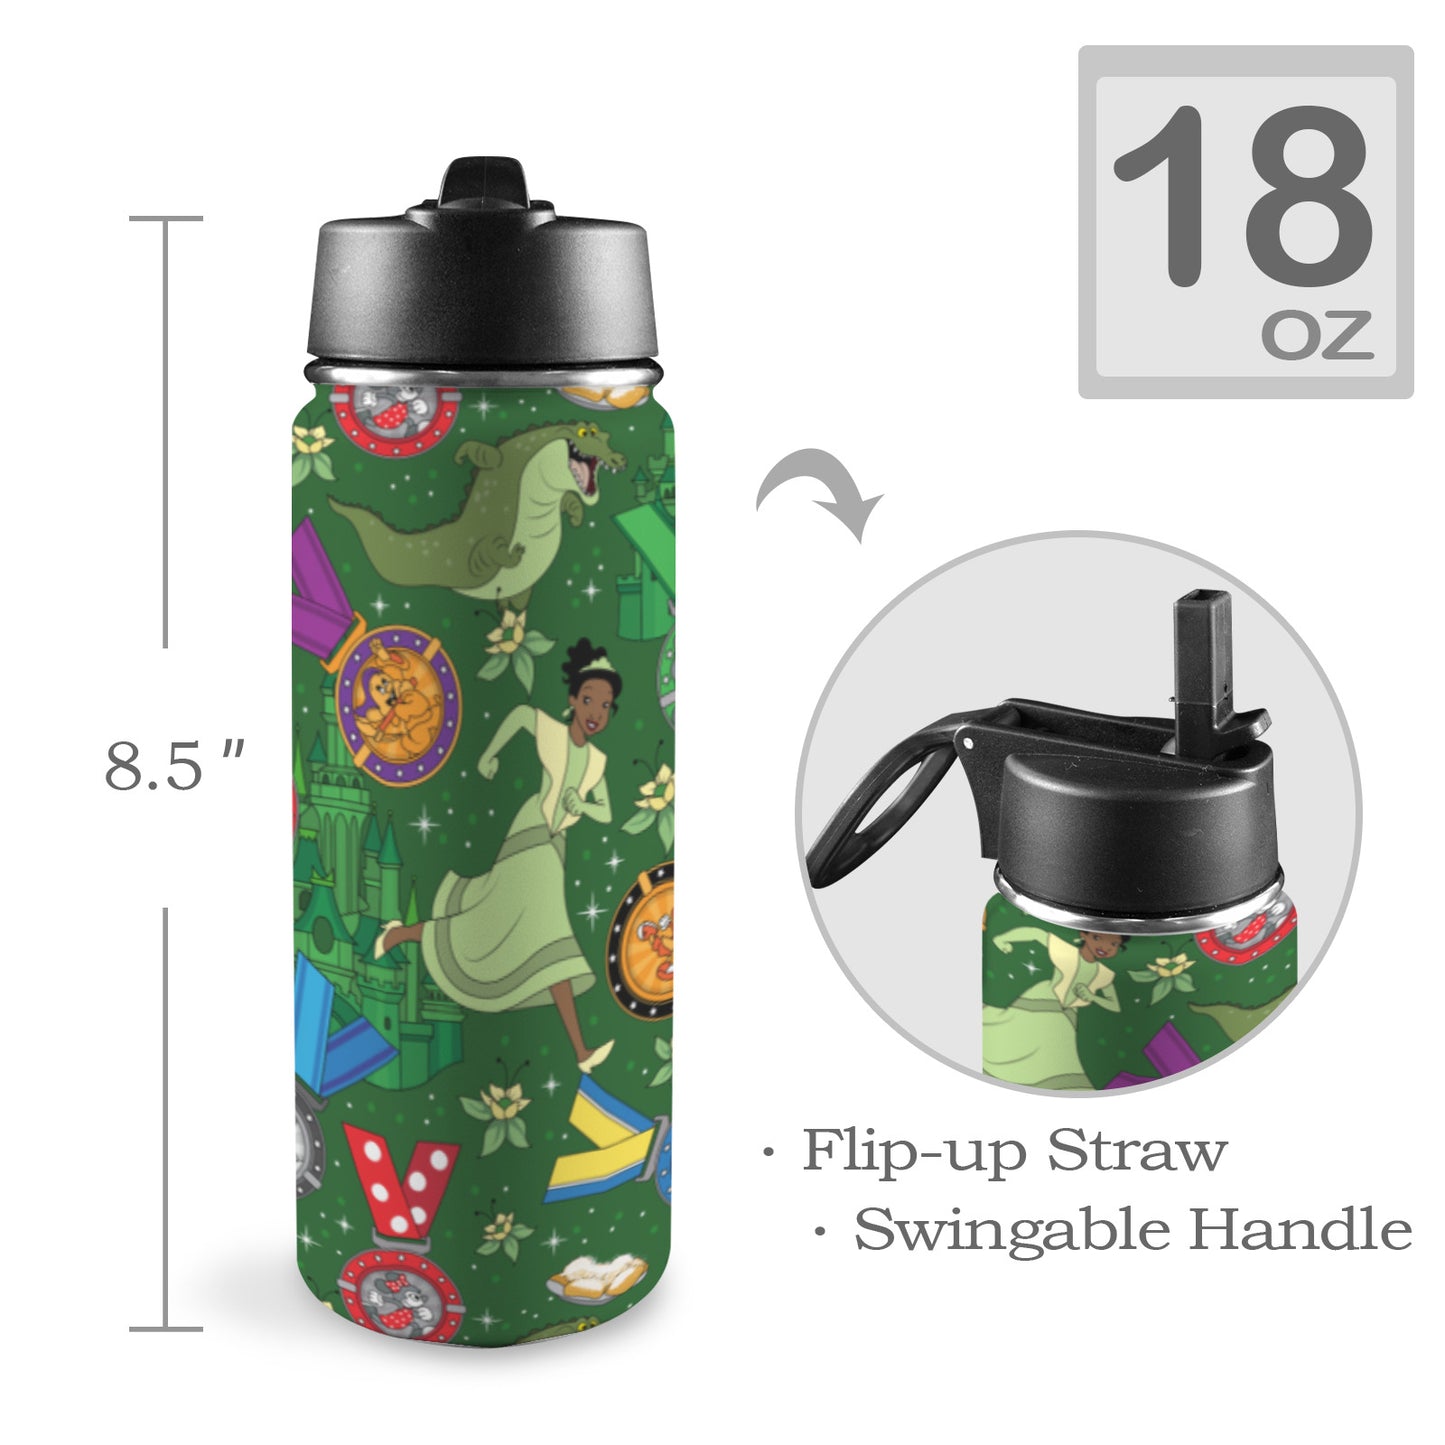 Tiana Wine And Dine Race Insulated Water Bottle